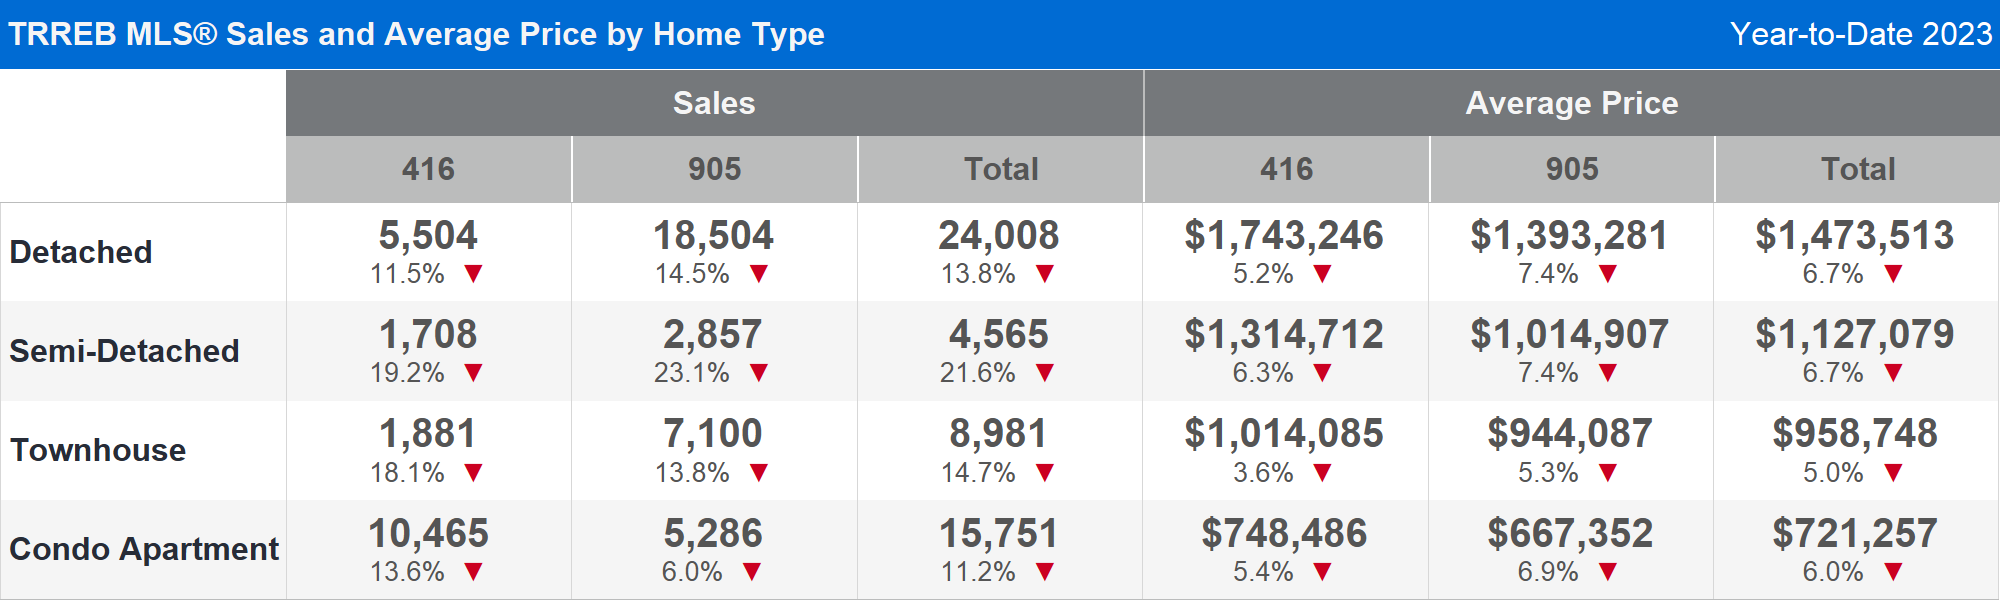 TRREB MLS® Sales and Average Price by Home Type Year-to-Date 2023